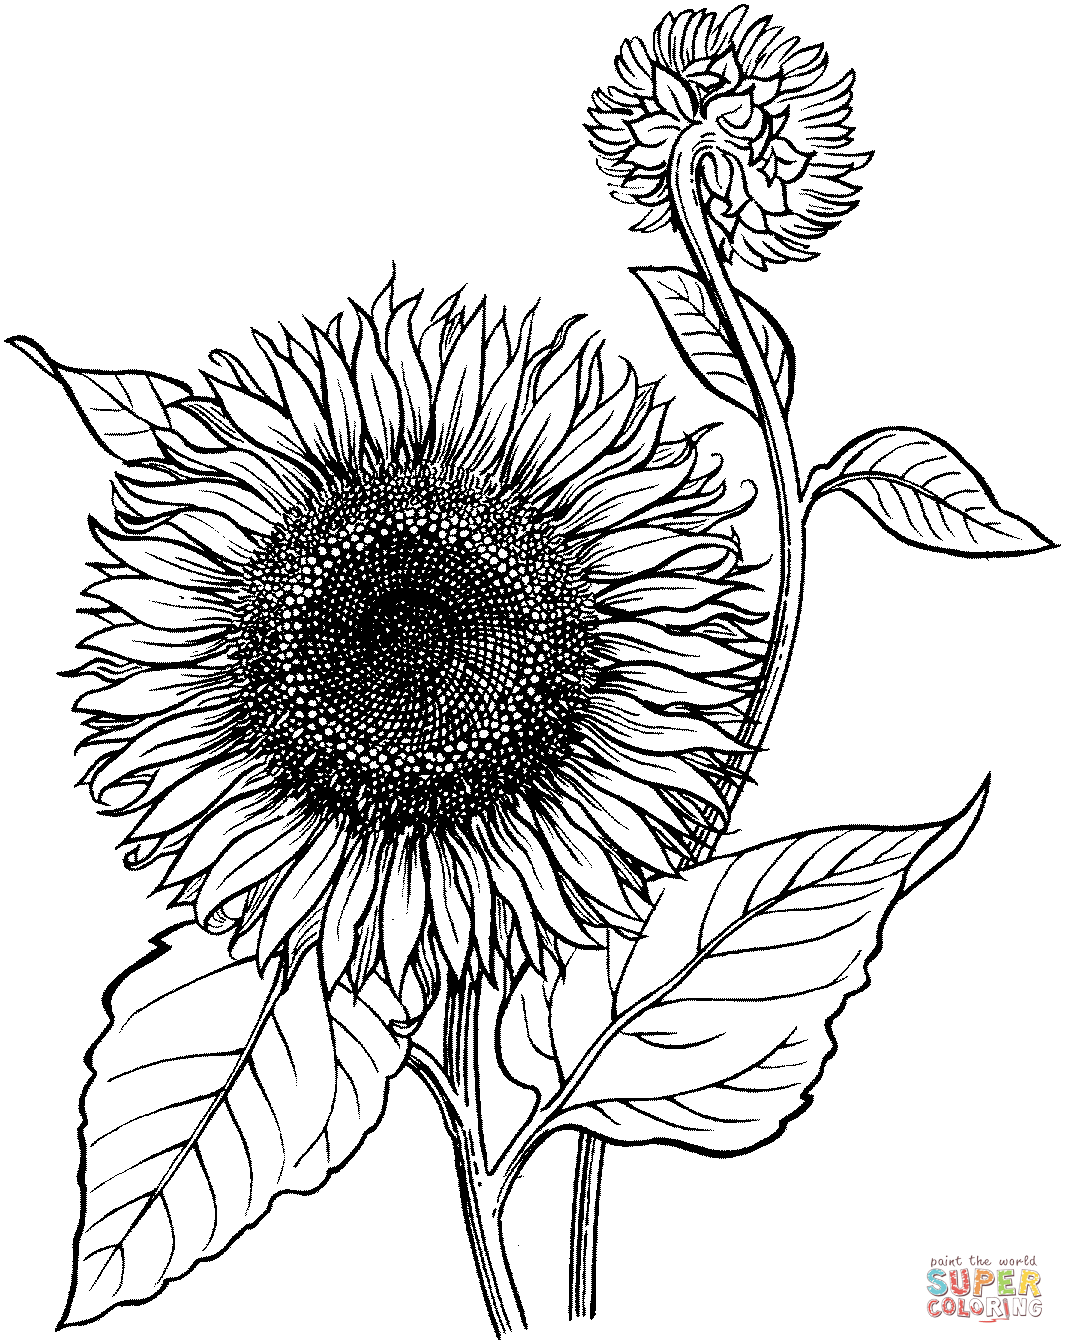 Sunflower Coloring Pages Printable - Printable World Holiday